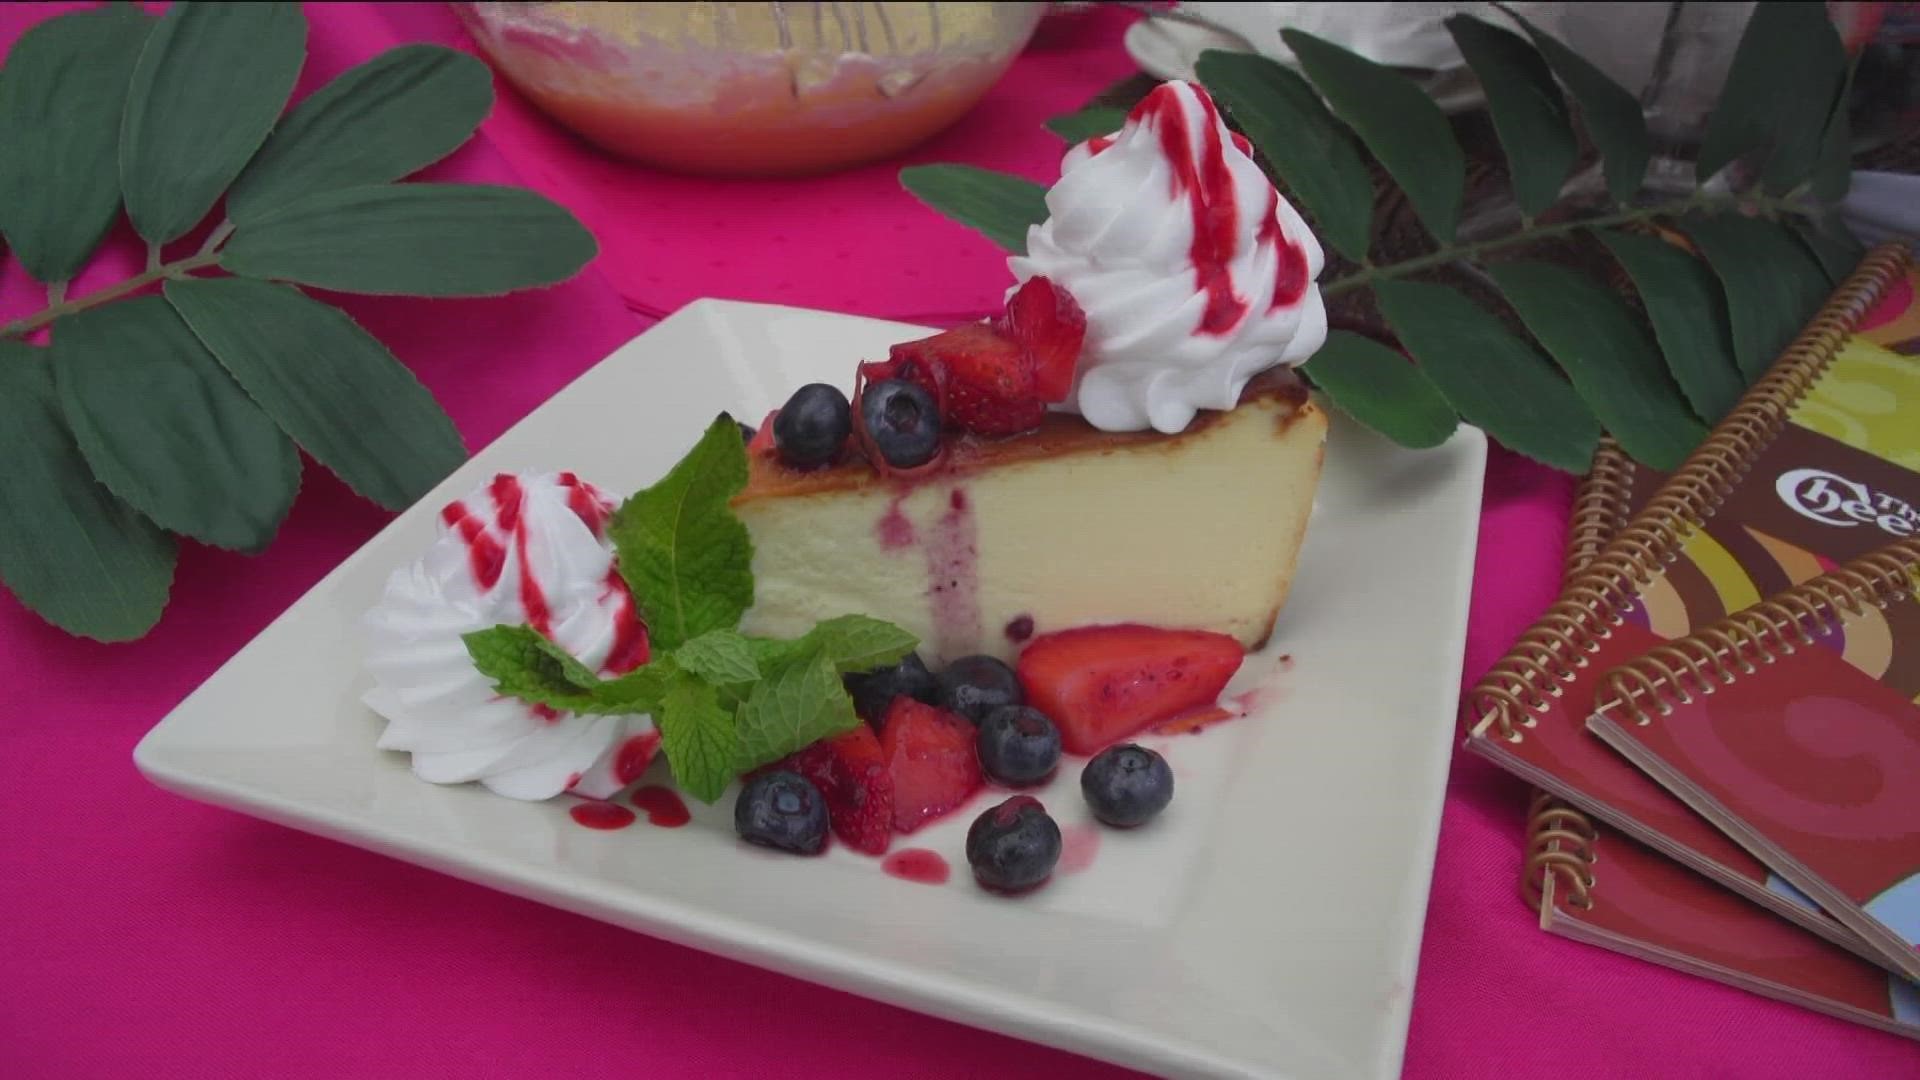 The Cheesecake Factory Celebrates National Cheesecake Day Saturday